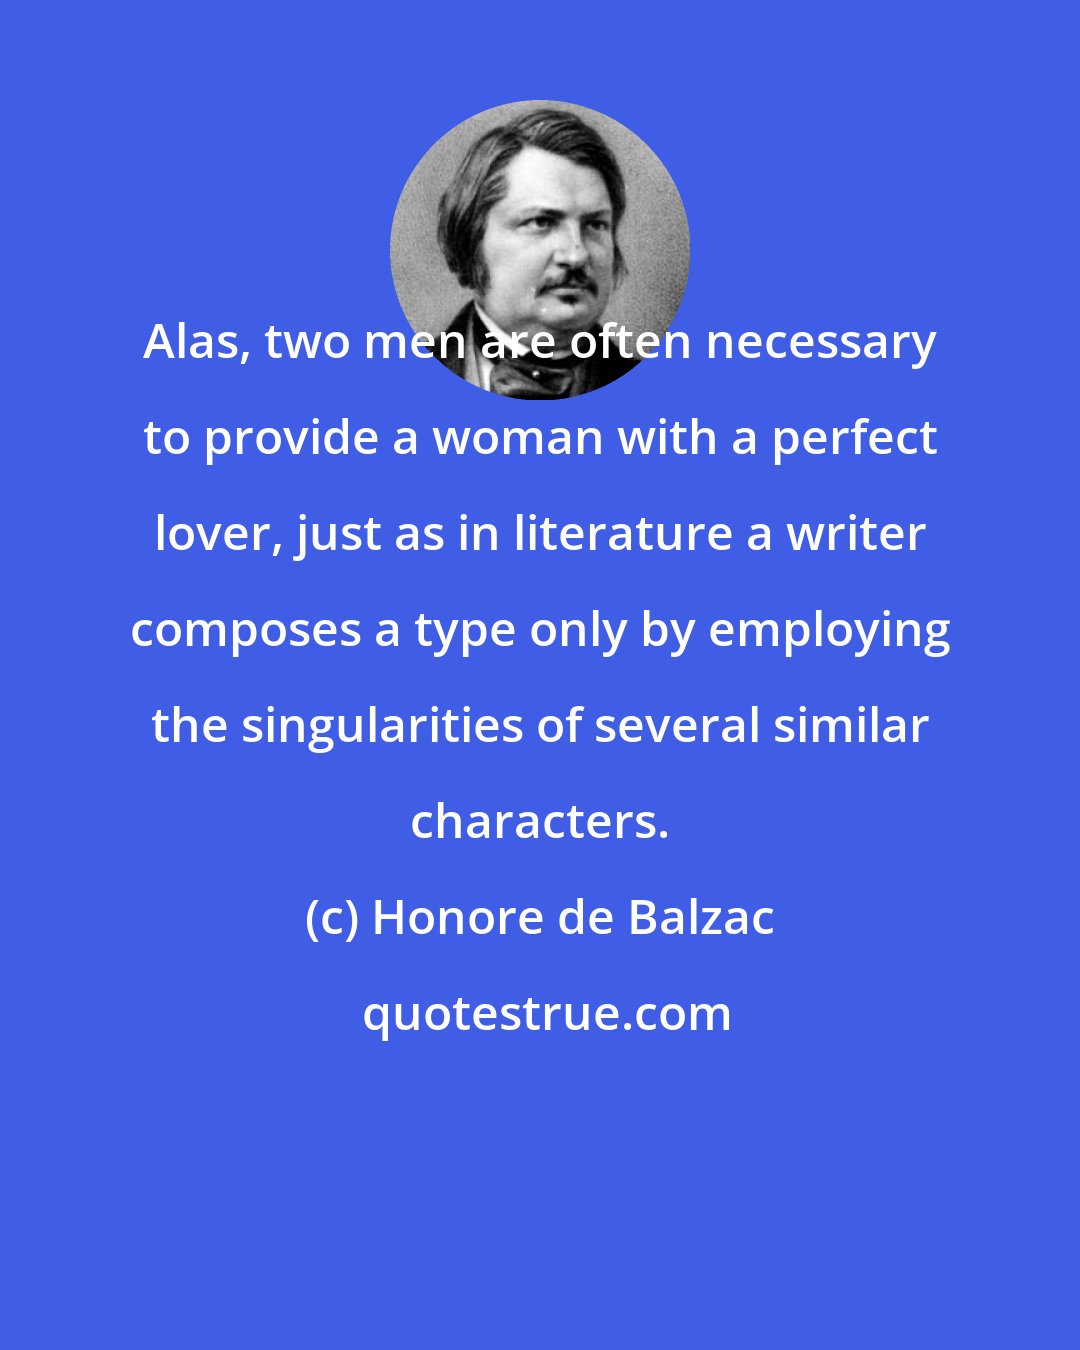 Honore de Balzac: Alas, two men are often necessary to provide a woman with a perfect lover, just as in literature a writer composes a type only by employing the singularities of several similar characters.